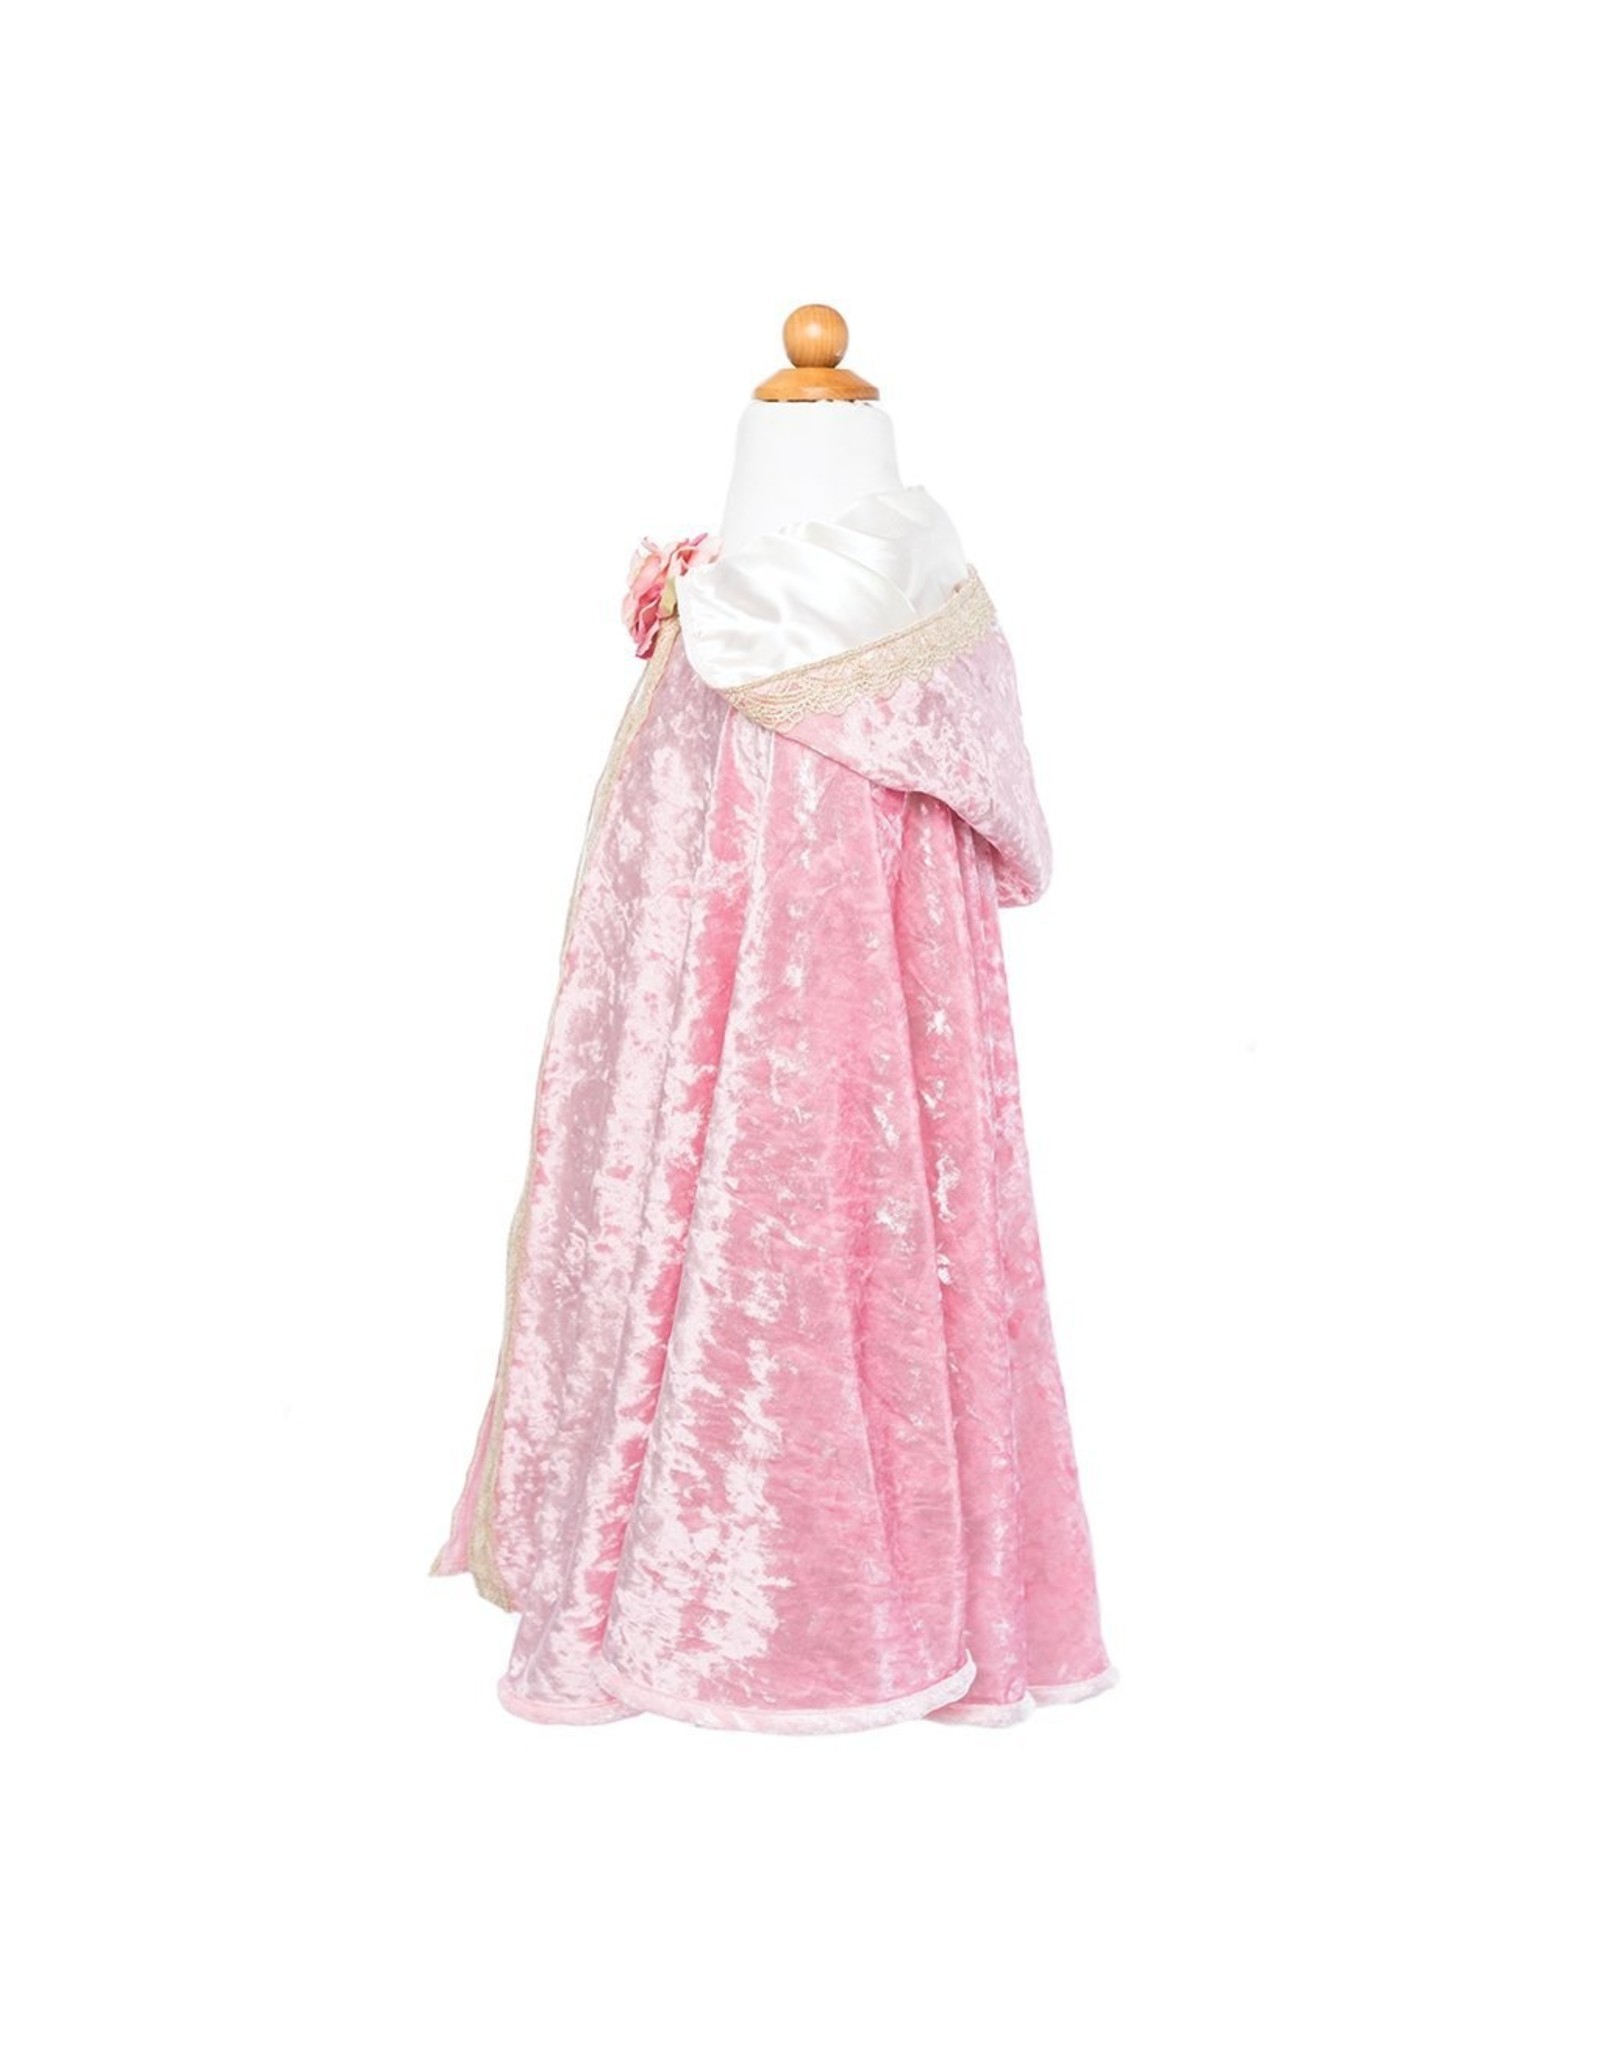 Great Pretenders Deluxe Pink Rose Princess Cape, Size 5/6